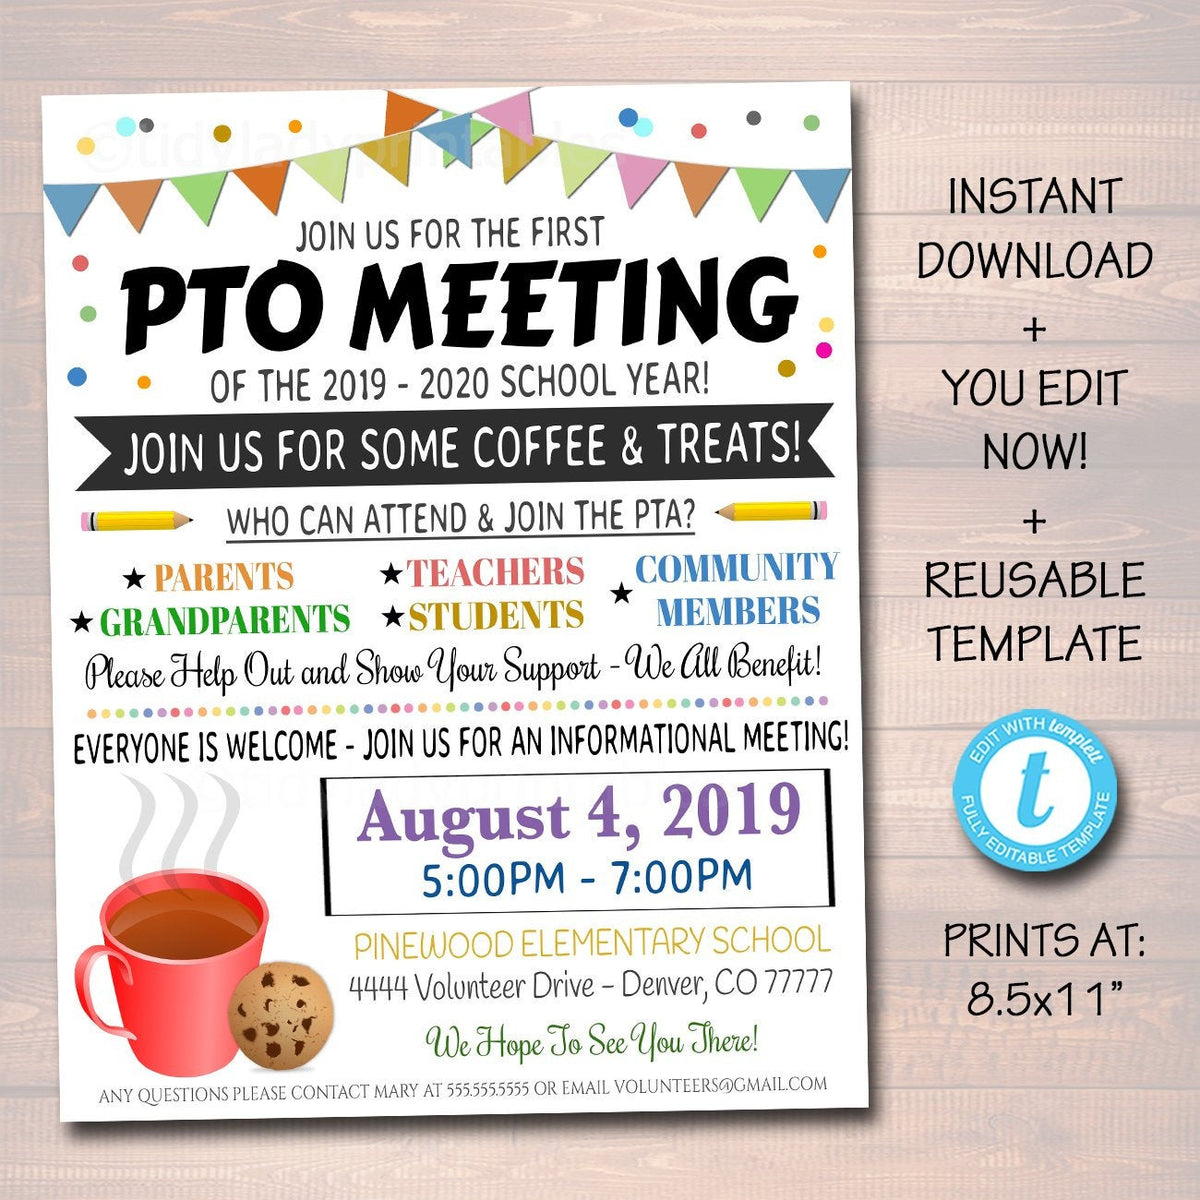 pto-pta-meeting-informational-event-flyer-printable-template-tidylady-printables